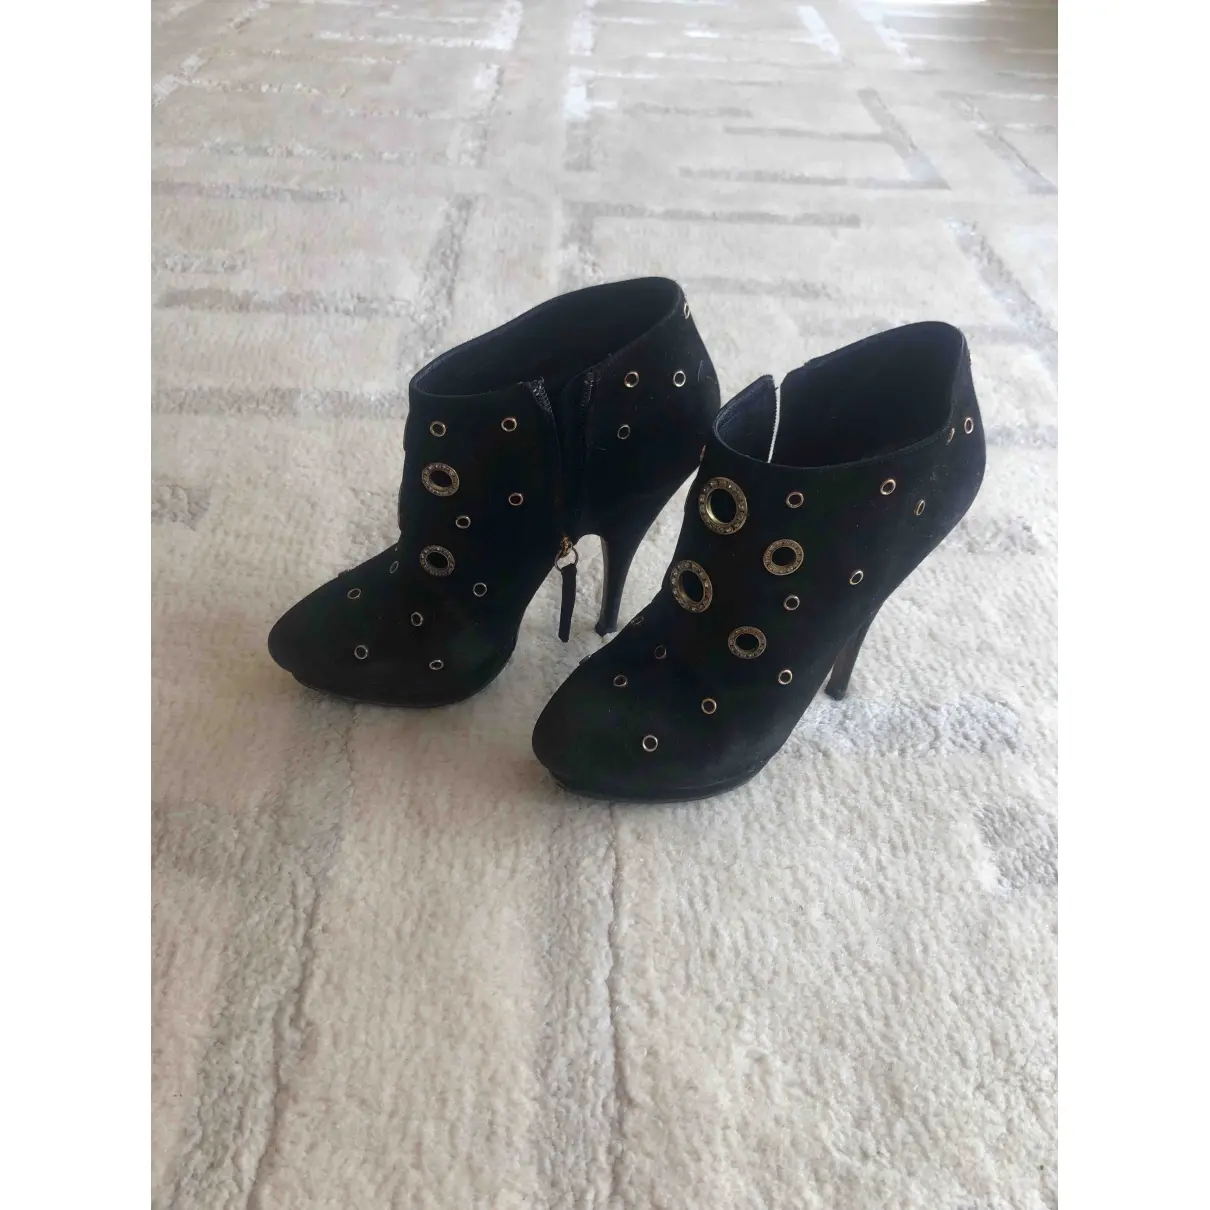 Giuseppe Zanotti Ankle boots for sale